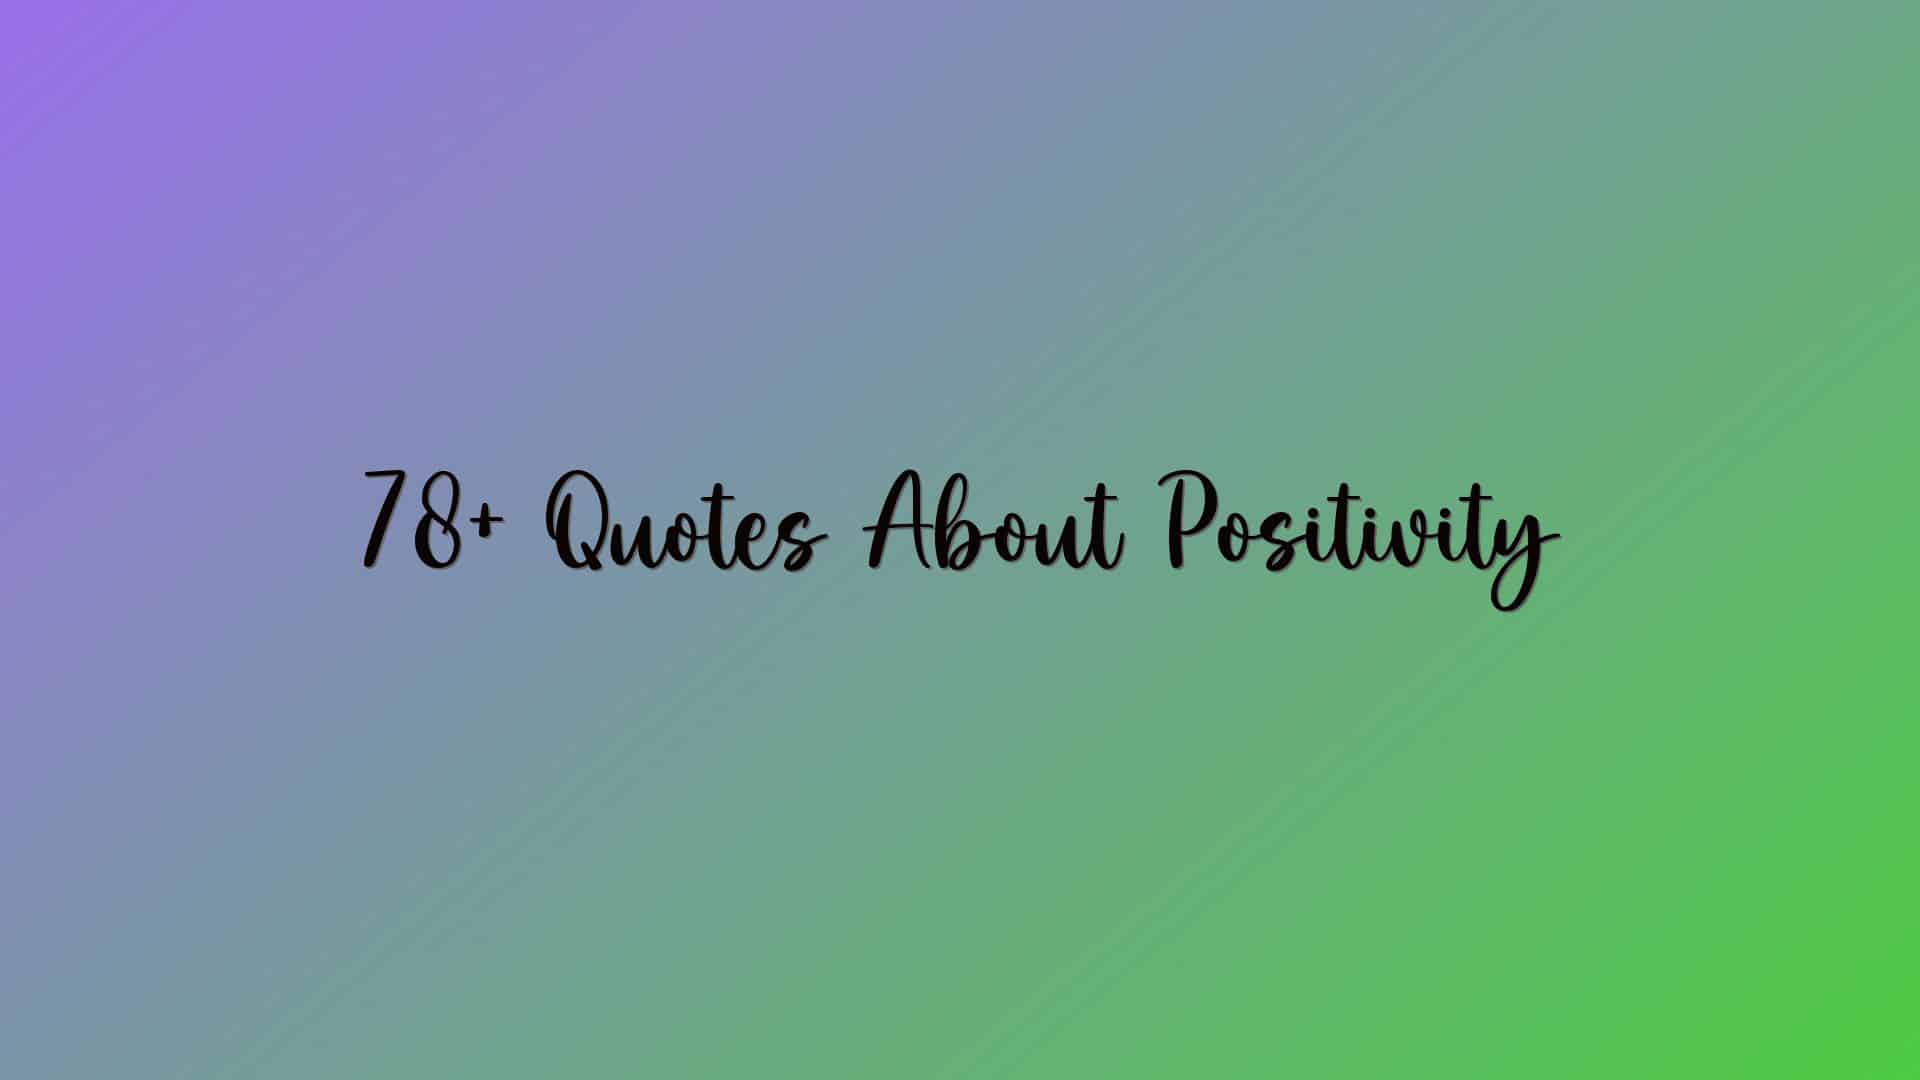 78+ Quotes About Positivity